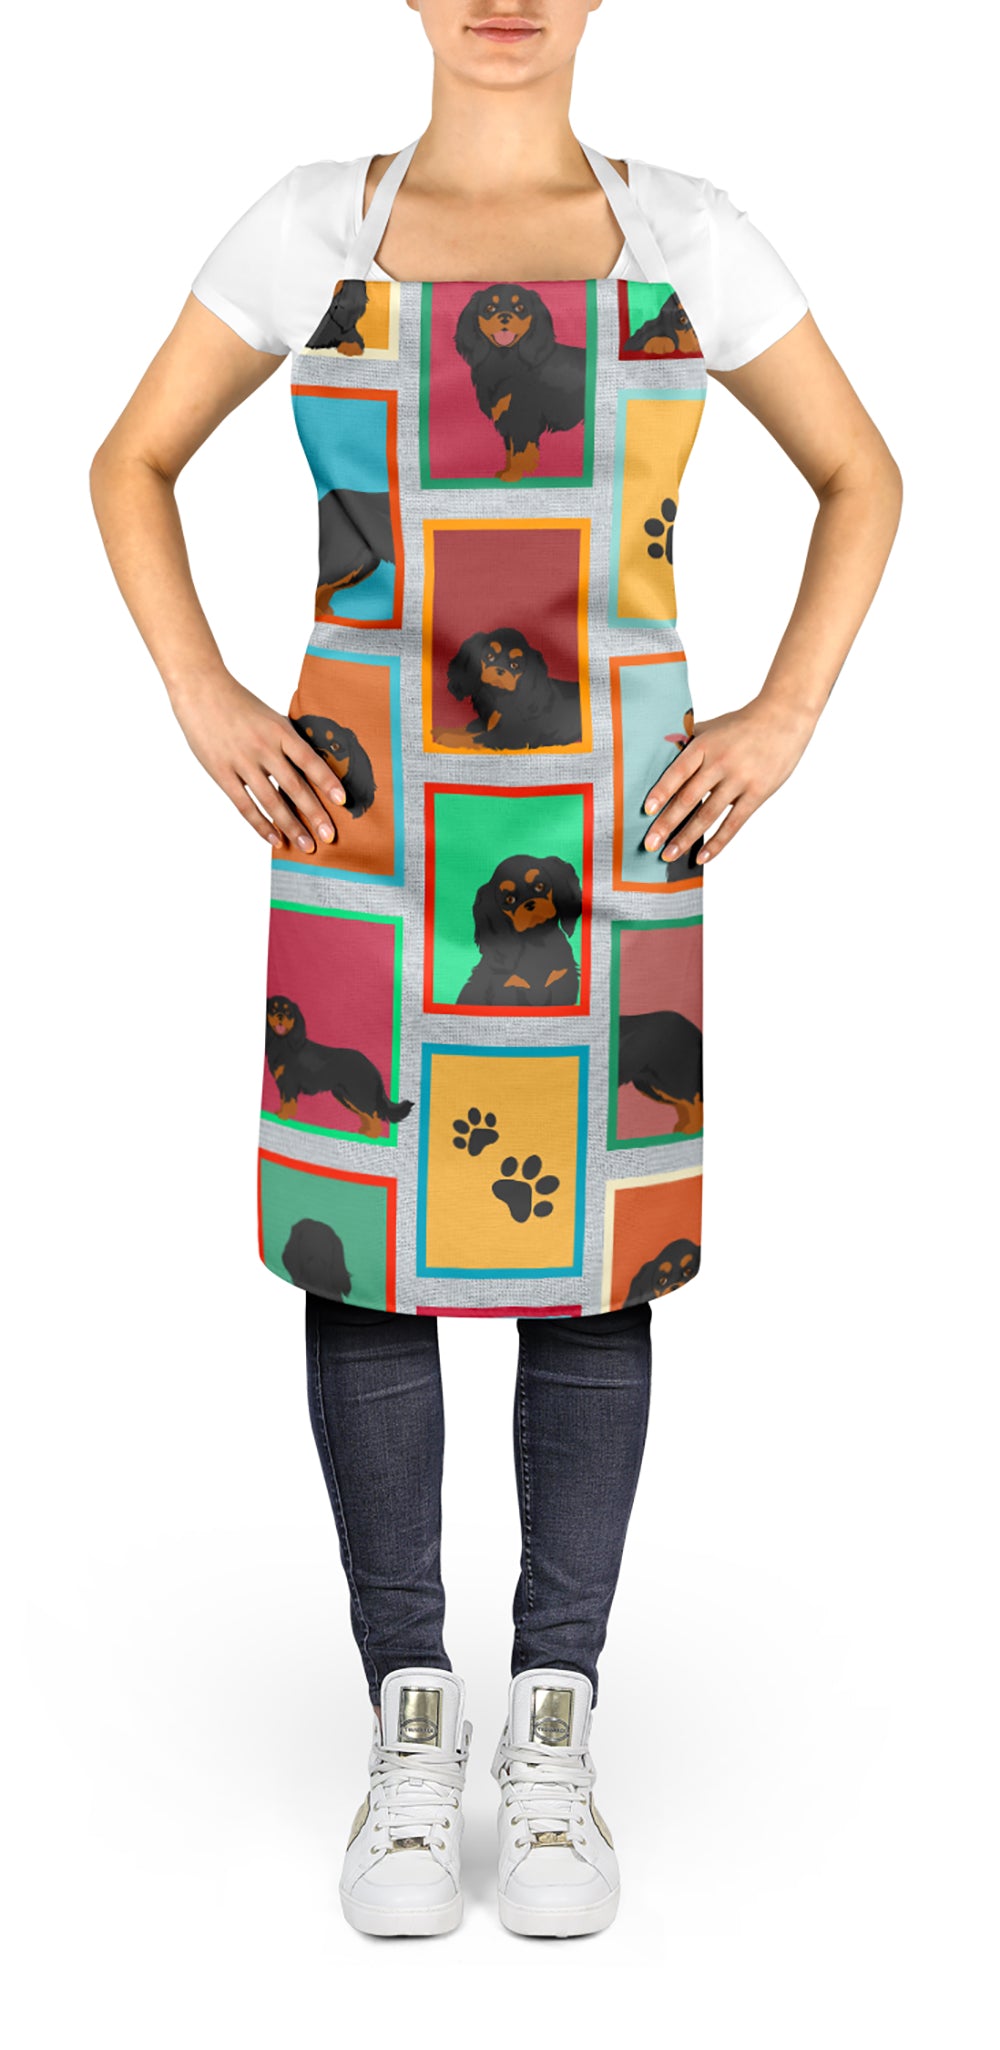 Lots of Black and Tan Cavalier King Charles Spaniel Apron